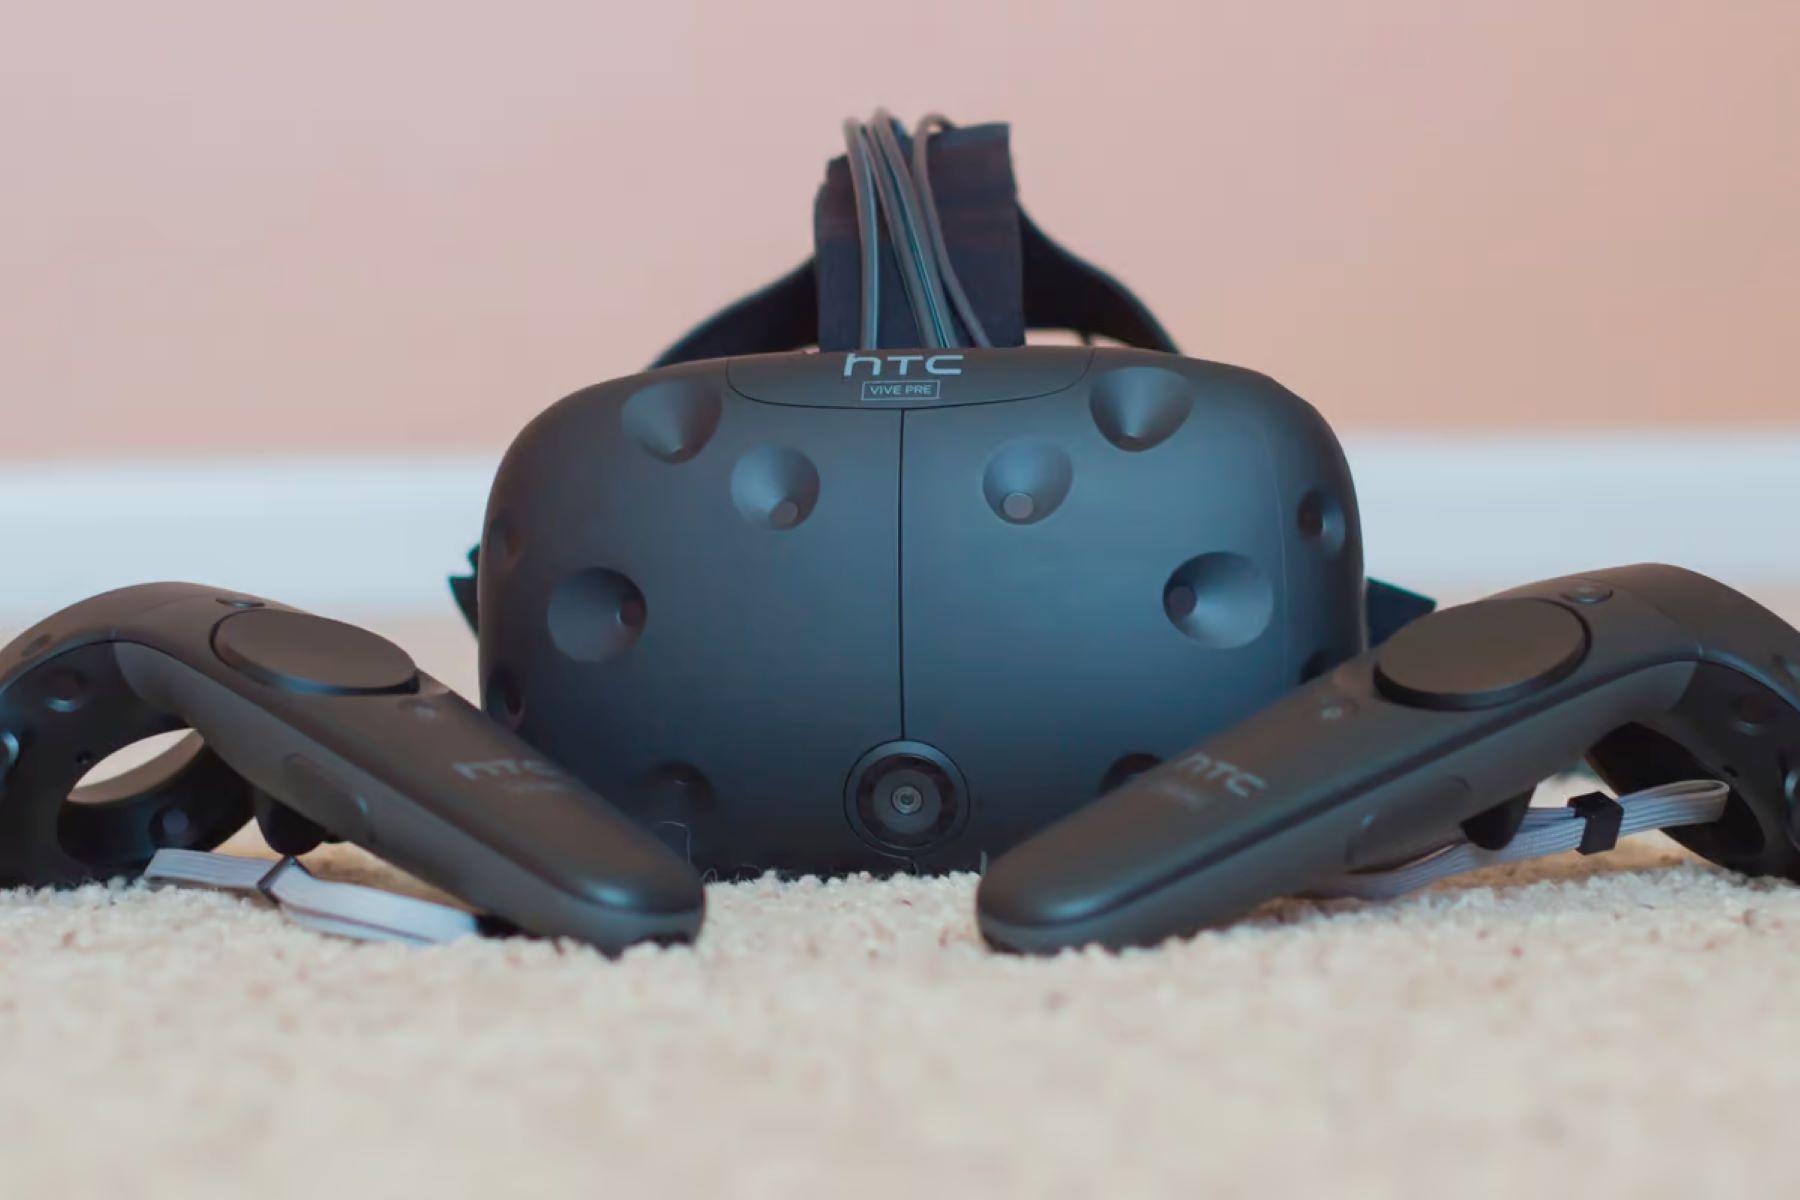 How To Open HTC Vive Headset